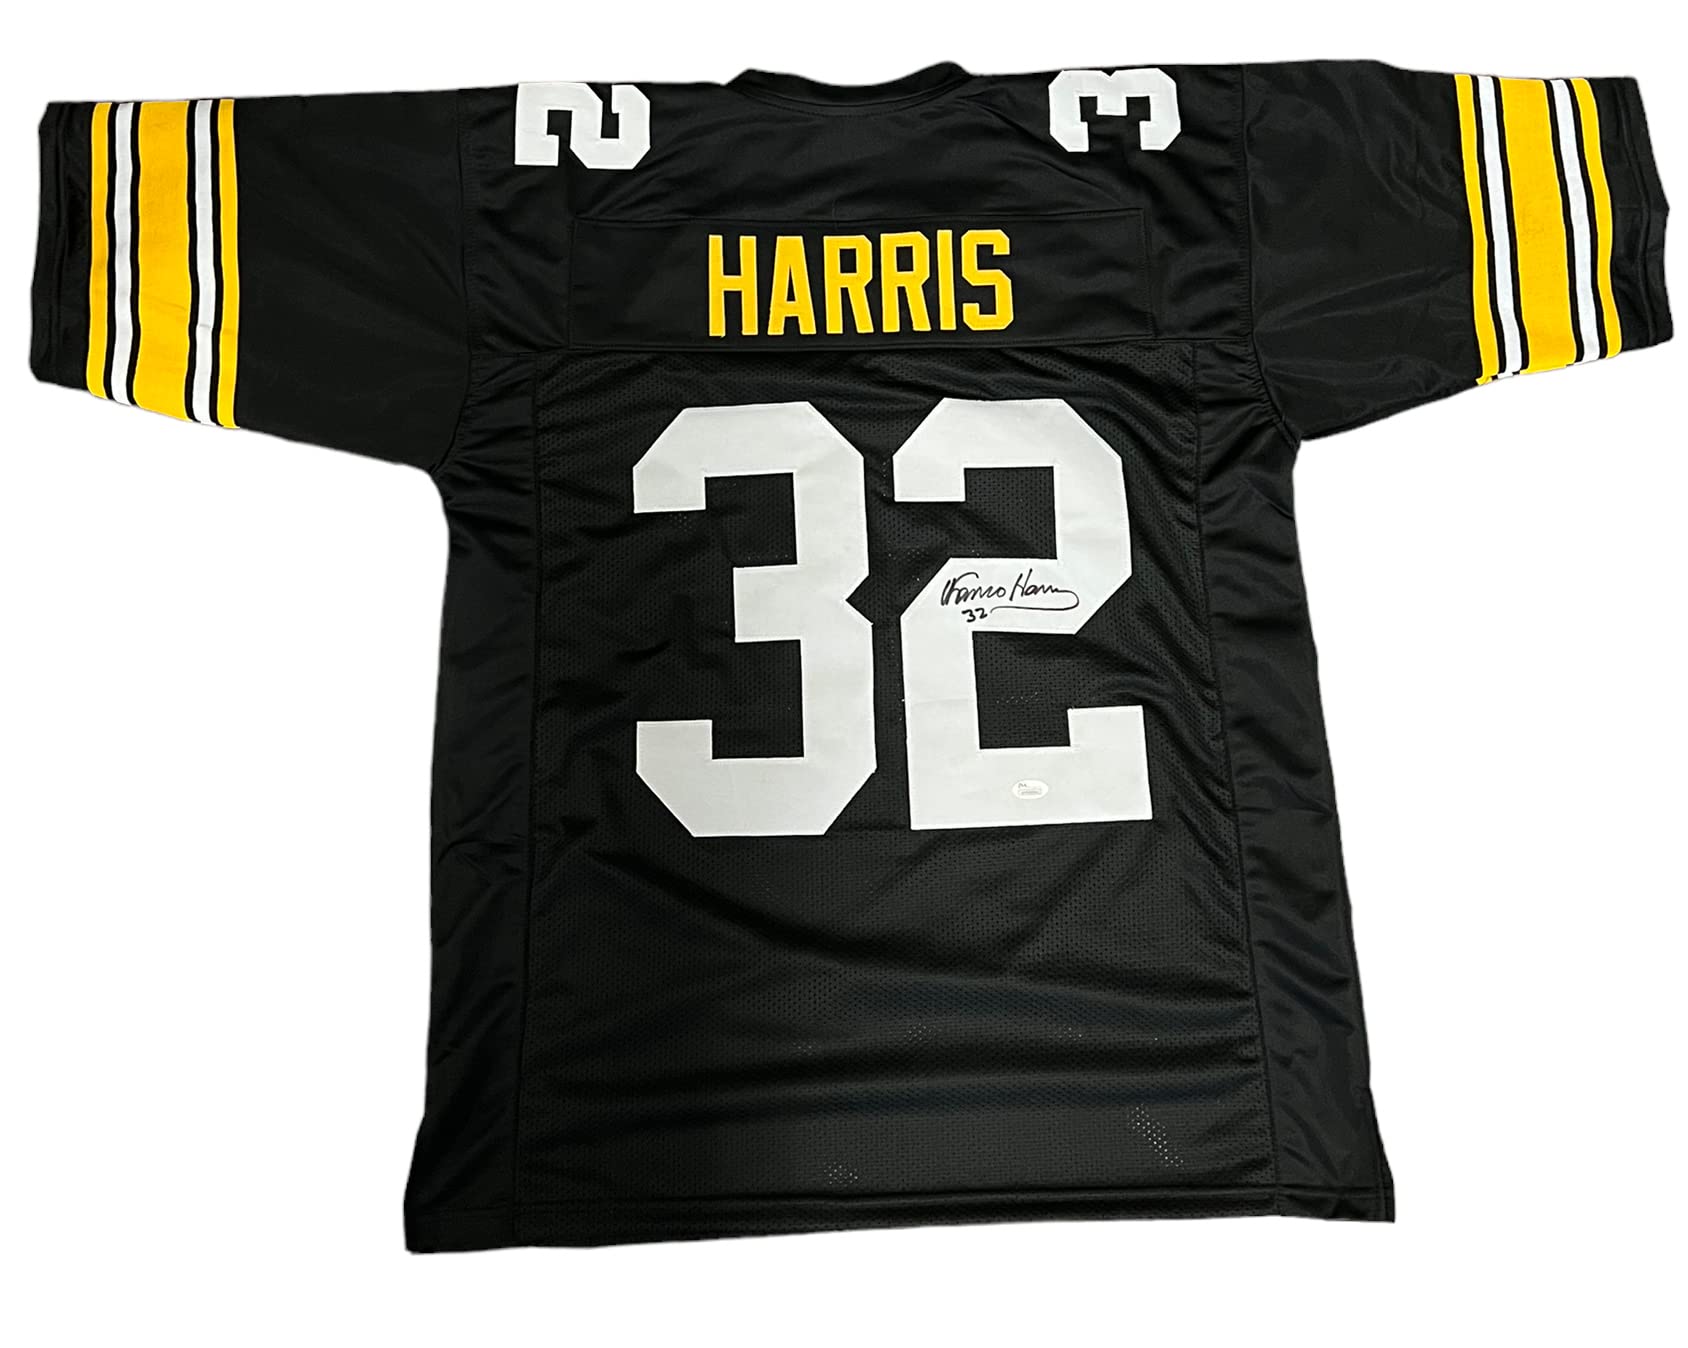 Franco Harris Pittsburgh Steelers Signed Autograph Custom Jersey